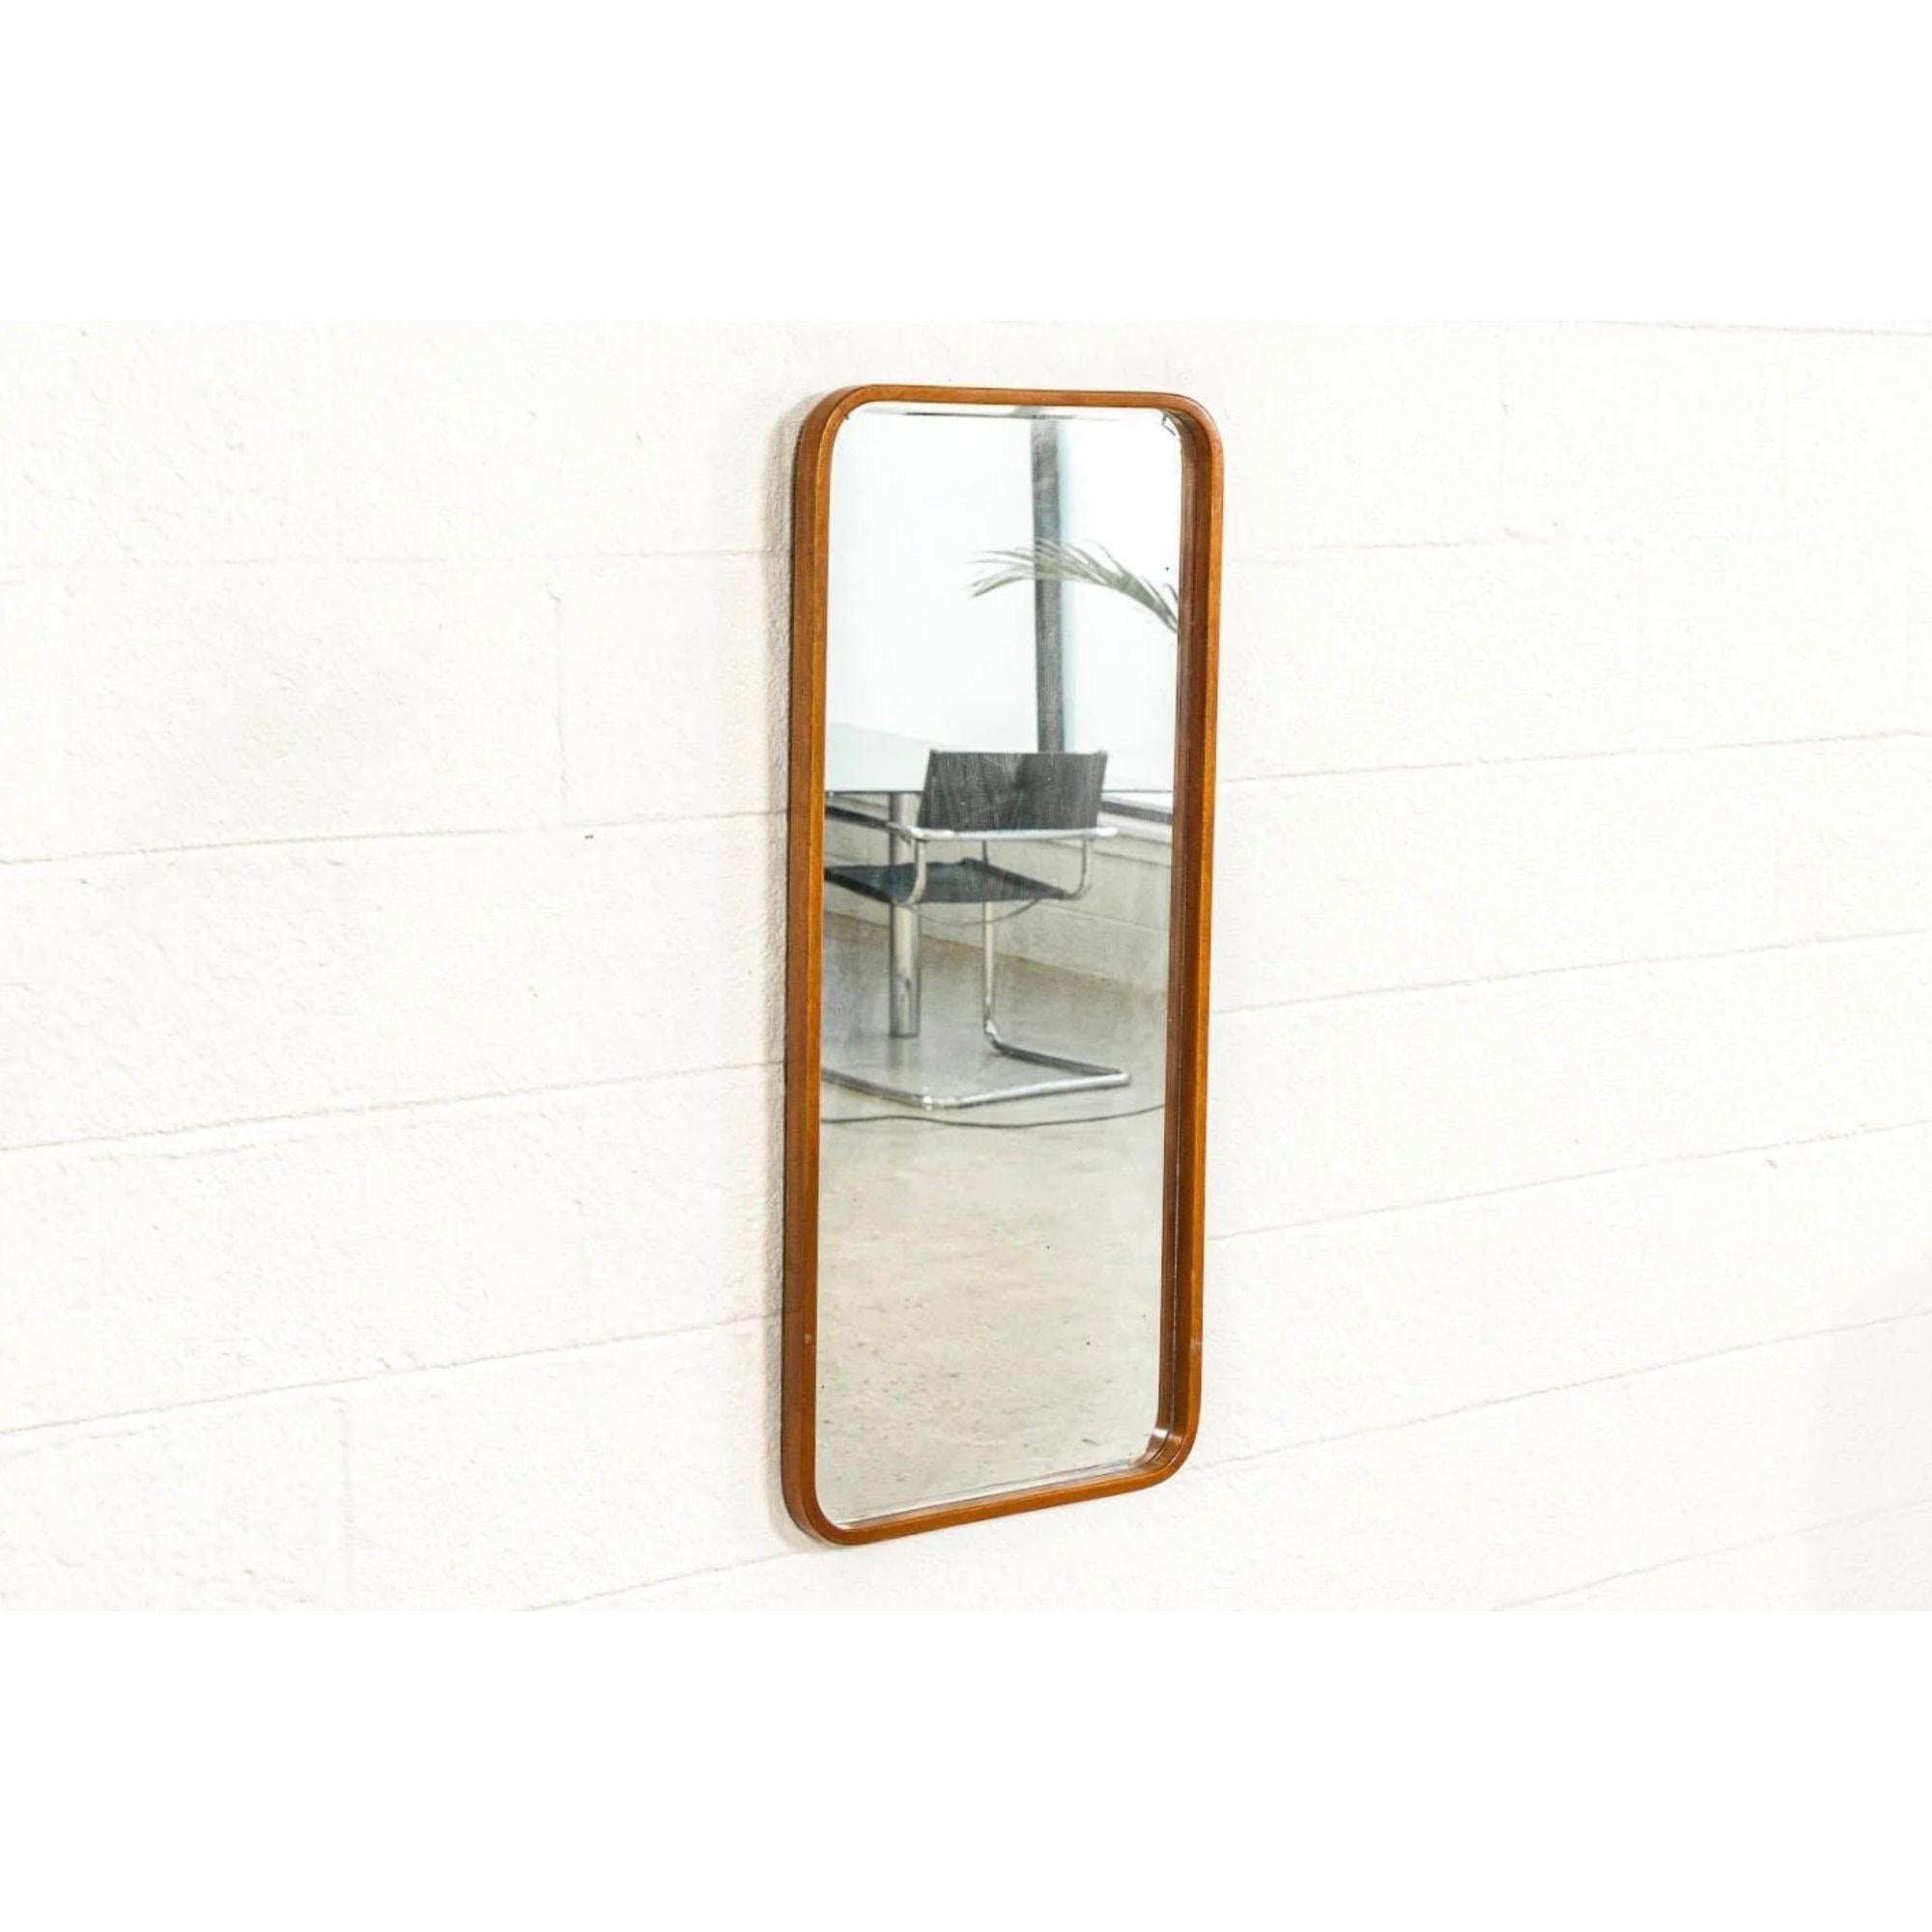 Vintage Mid Century Teak Wood Hanging Wall Mirror, 1960s

This vintage mid century modern wall mirror is circa 1960. It features a clean, minimalist design with a beveled mirror and box frame with rounded bentwood corners well-crafted from solid